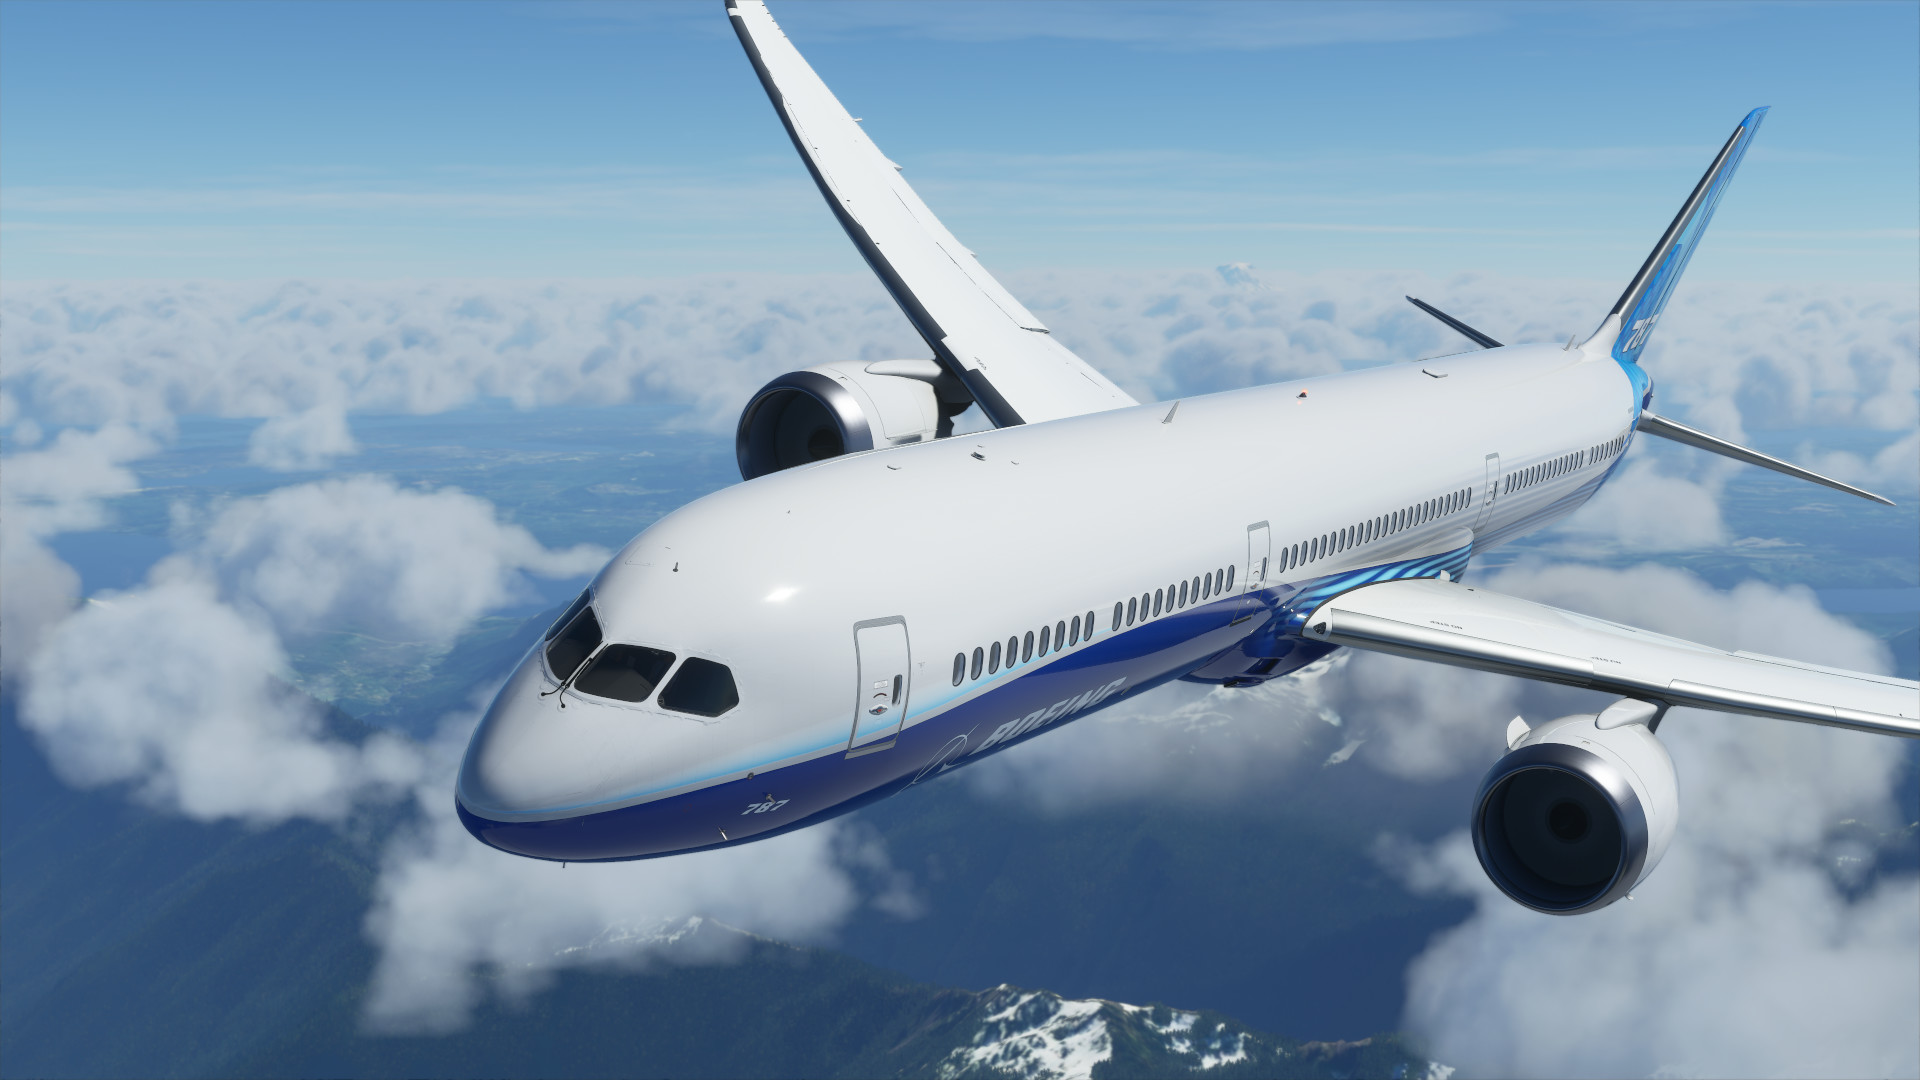 Microsoft Flight Simulator 2020 on Steam: How to Get it for Free and PC  Requirements